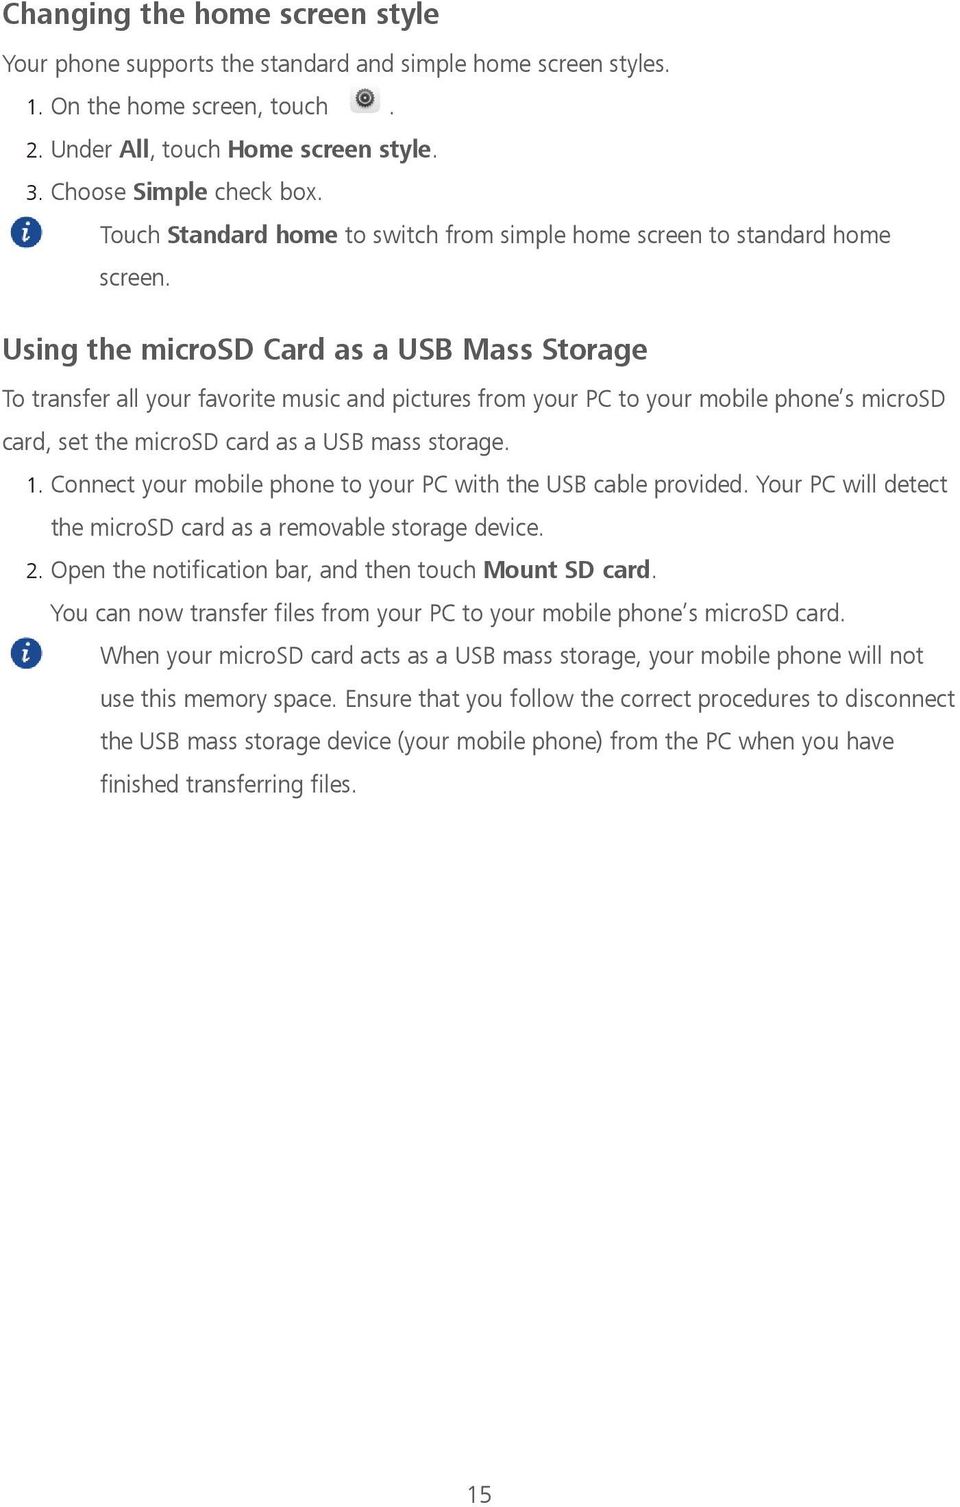 Using the microsd Card as a USB Mass Storage To transfer all your favorite music and pictures from your PC to your mobile phone s microsd card, set the microsd card as a USB mass storage. 1.